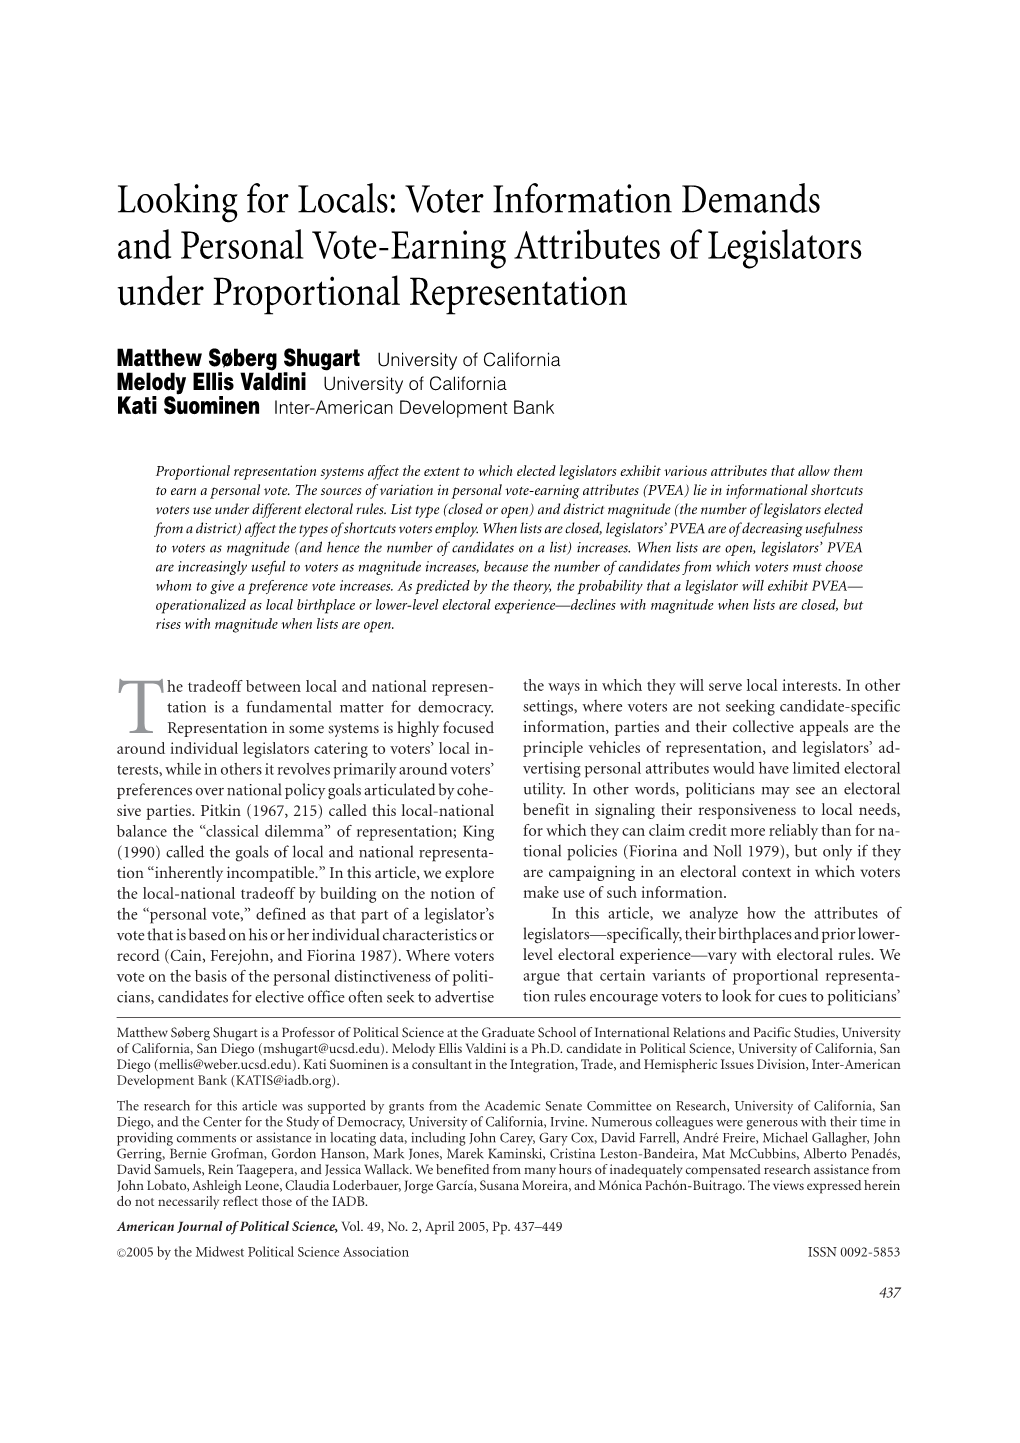 Looking for Locals: Voter Information Demands and Personal Vote-Earning Attributes of Legislators Under Proportional Representation